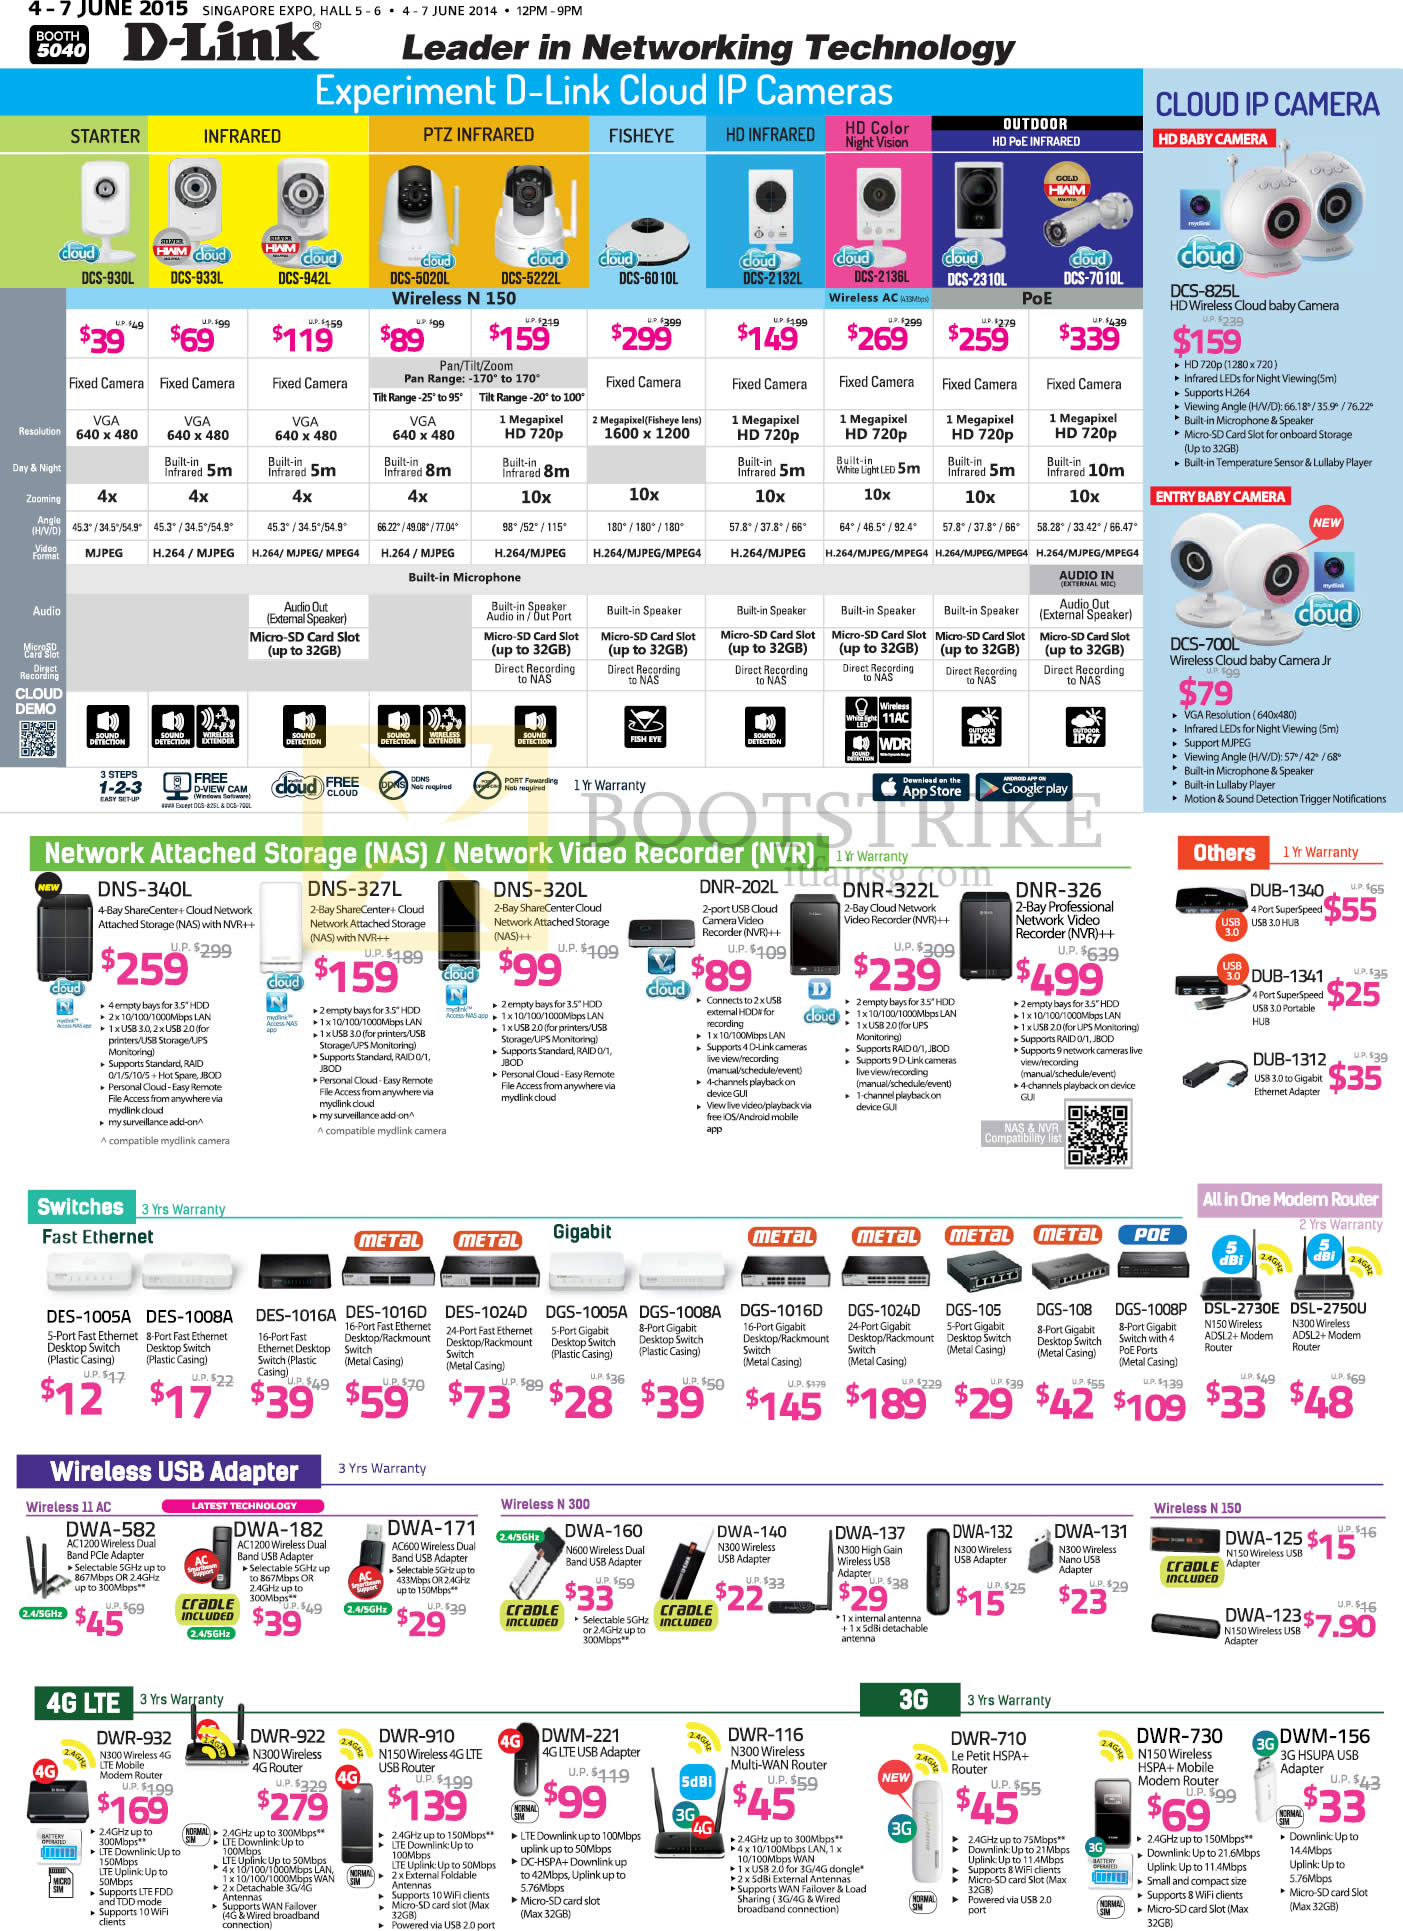 PC SHOW 2015 price list image brochure of D-Link Networking Cloud IPCam, NAS, Switch, Wireless USB Adapter, 4G LTE, Modem